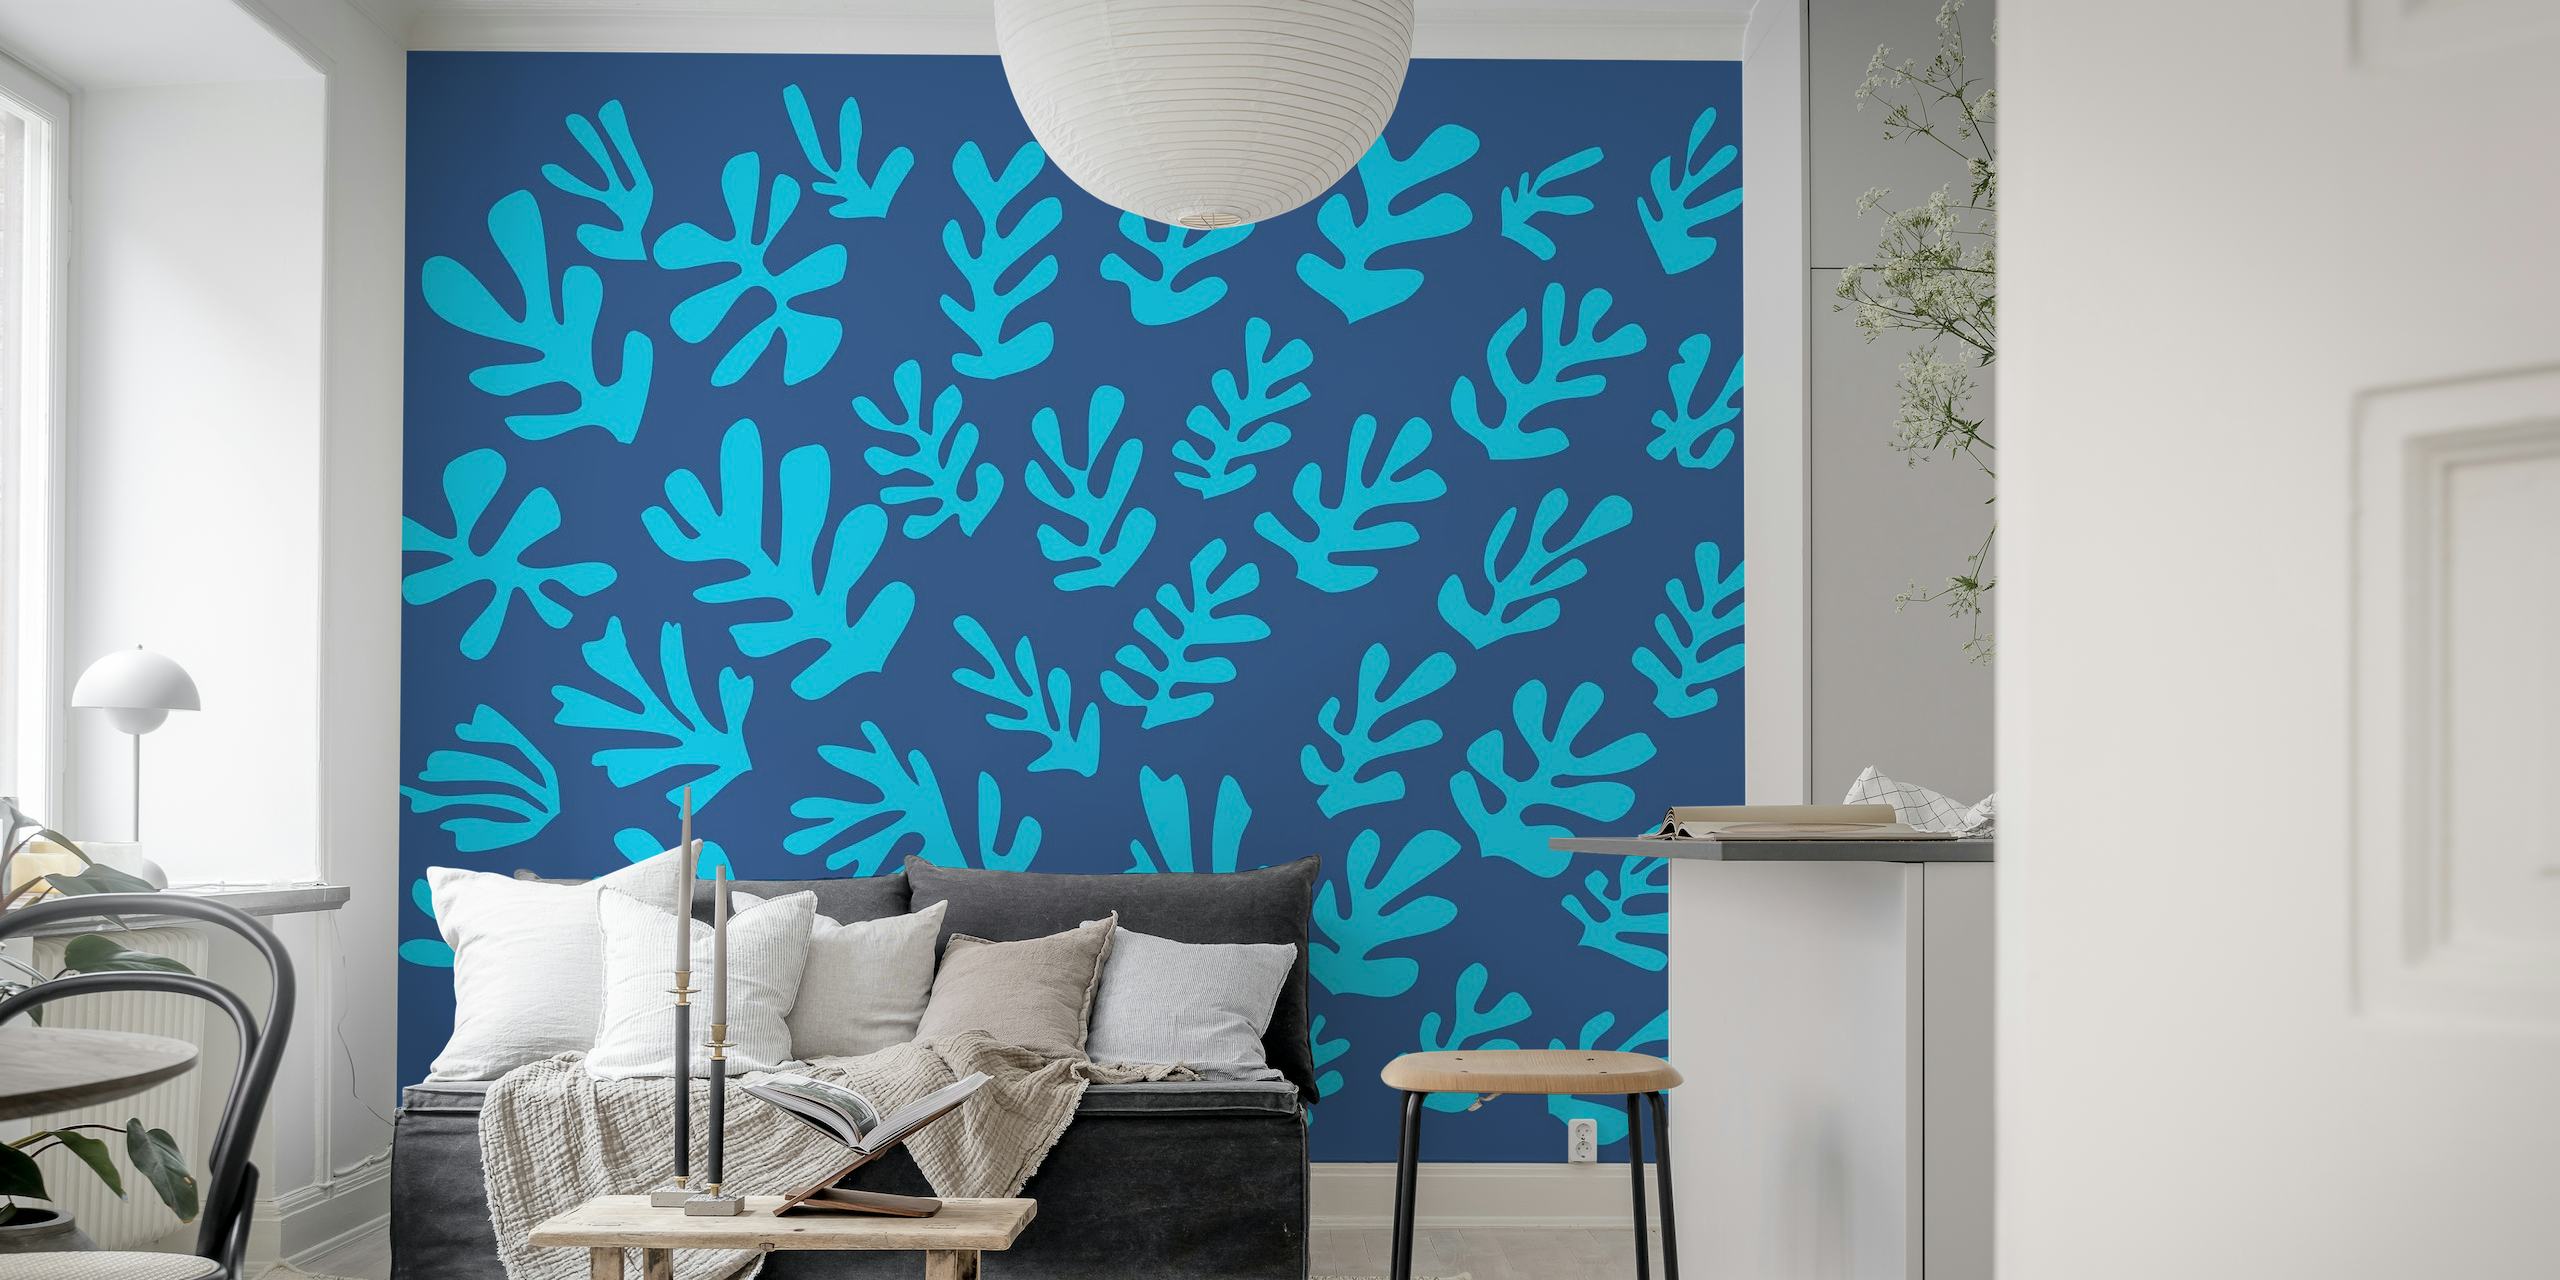 Minimalist Matisse-style blue leaves wall mural on a rich background.